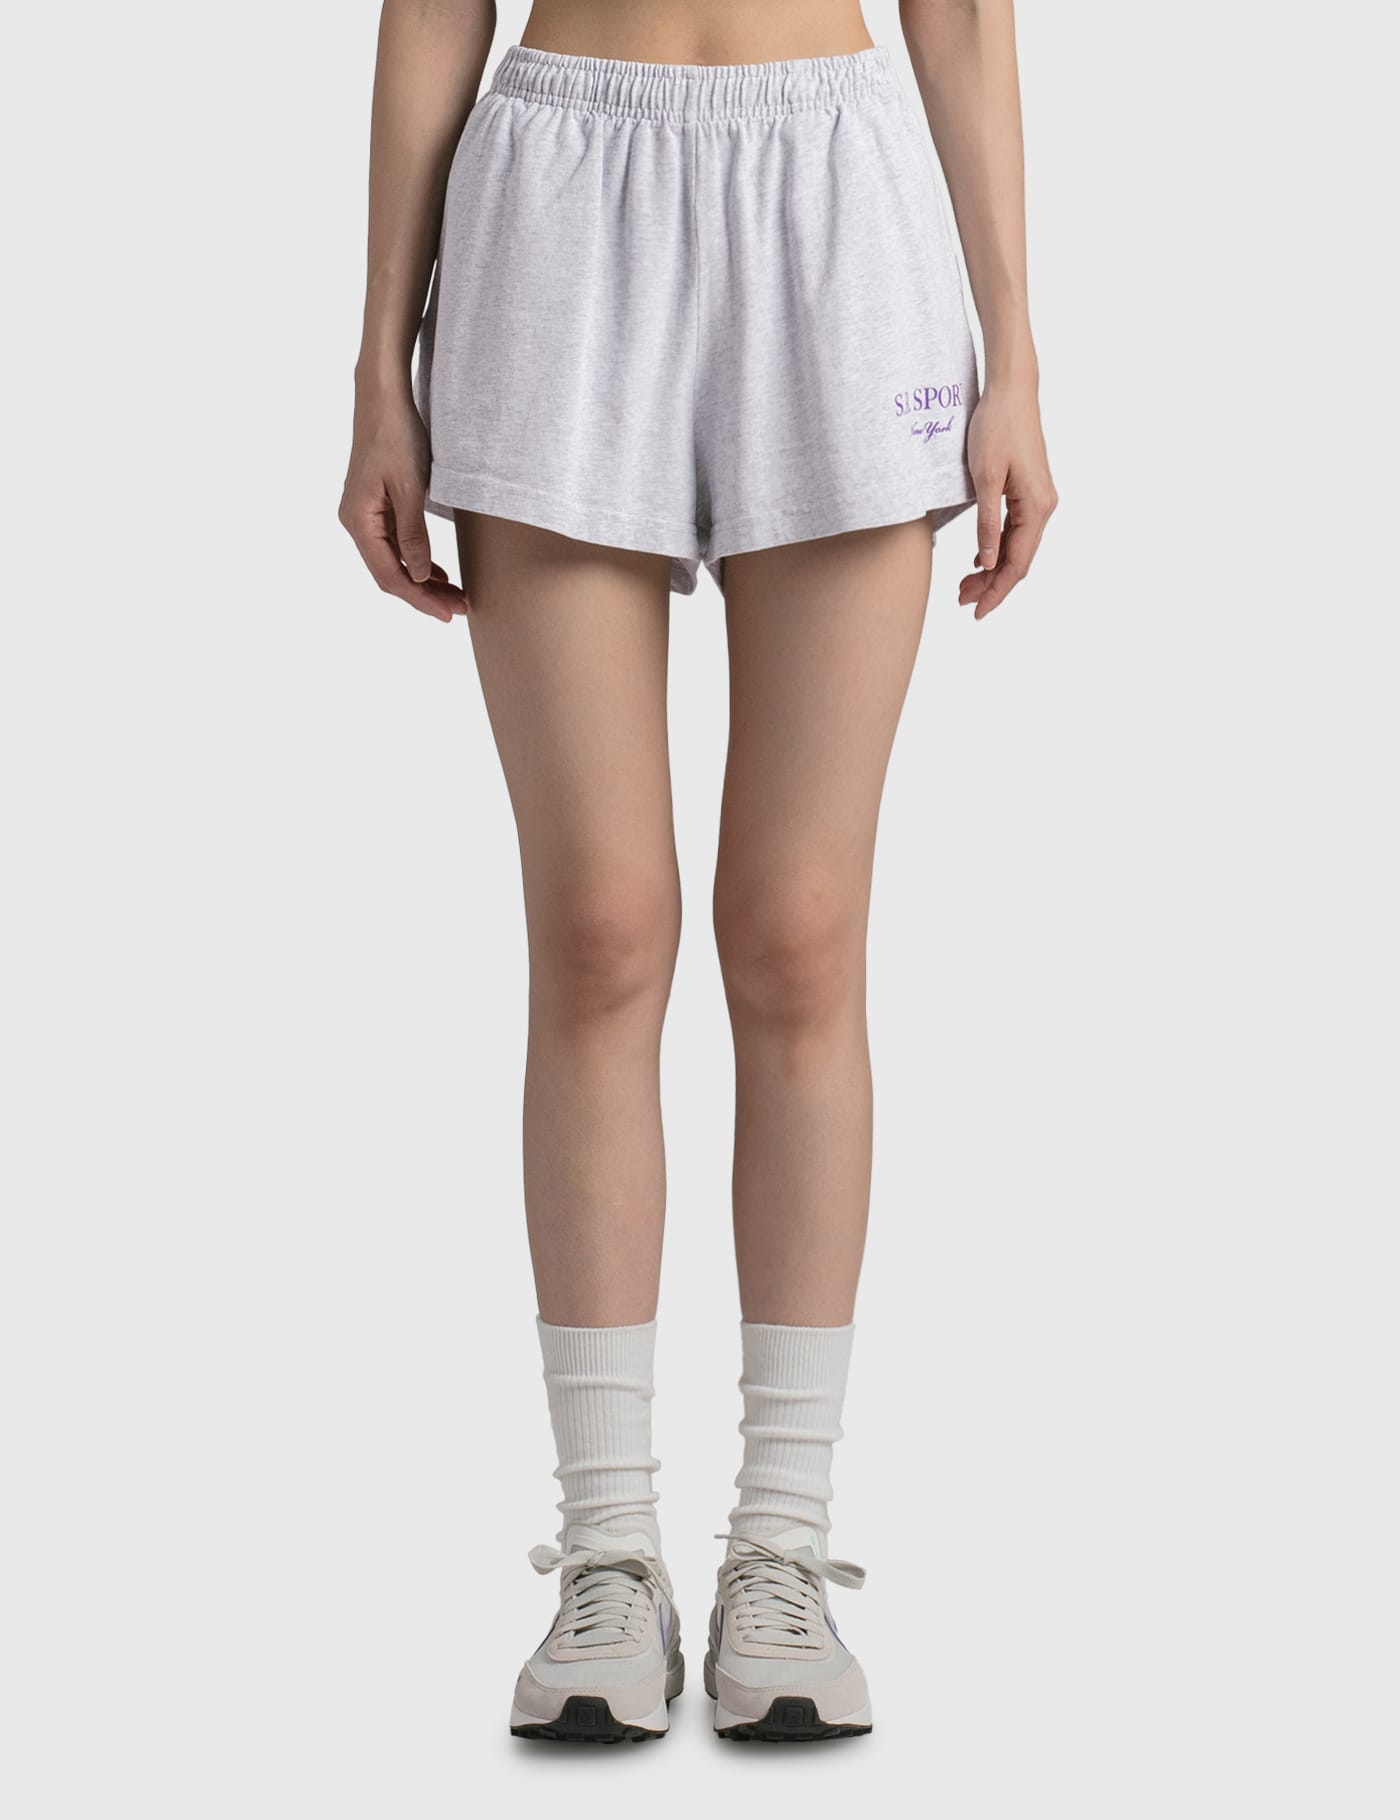 Sporty & Rich - Rizzoli Disco Shorts | HBX - Globally Curated ...